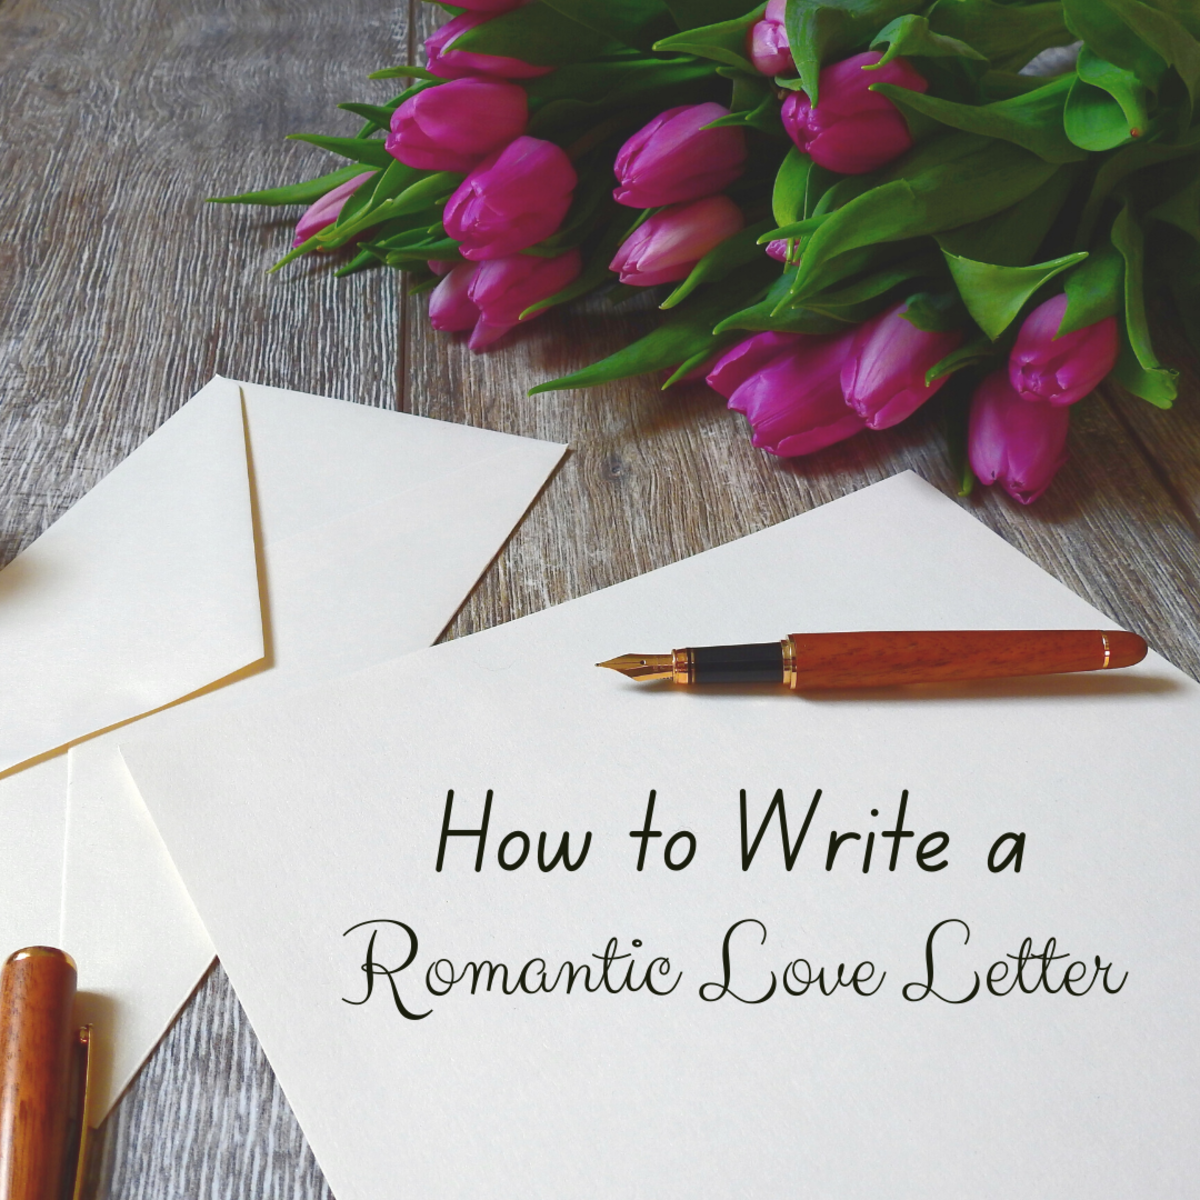 How to Write a Romantic Love Letter to Your Girlfriend or Wife